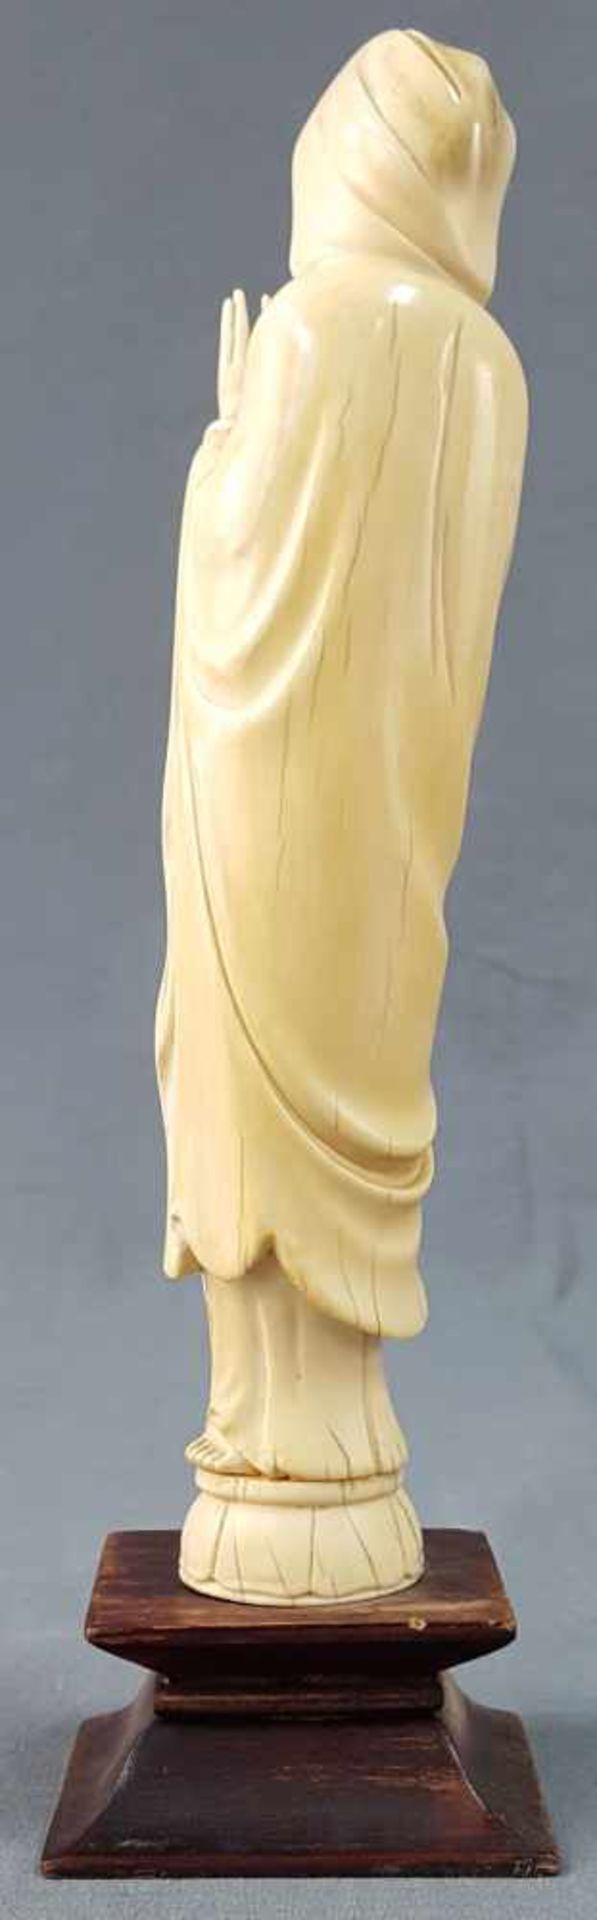 Lady with a blessing hand. China / Japan. Ivory. Old, around 1920. - Image 3 of 6